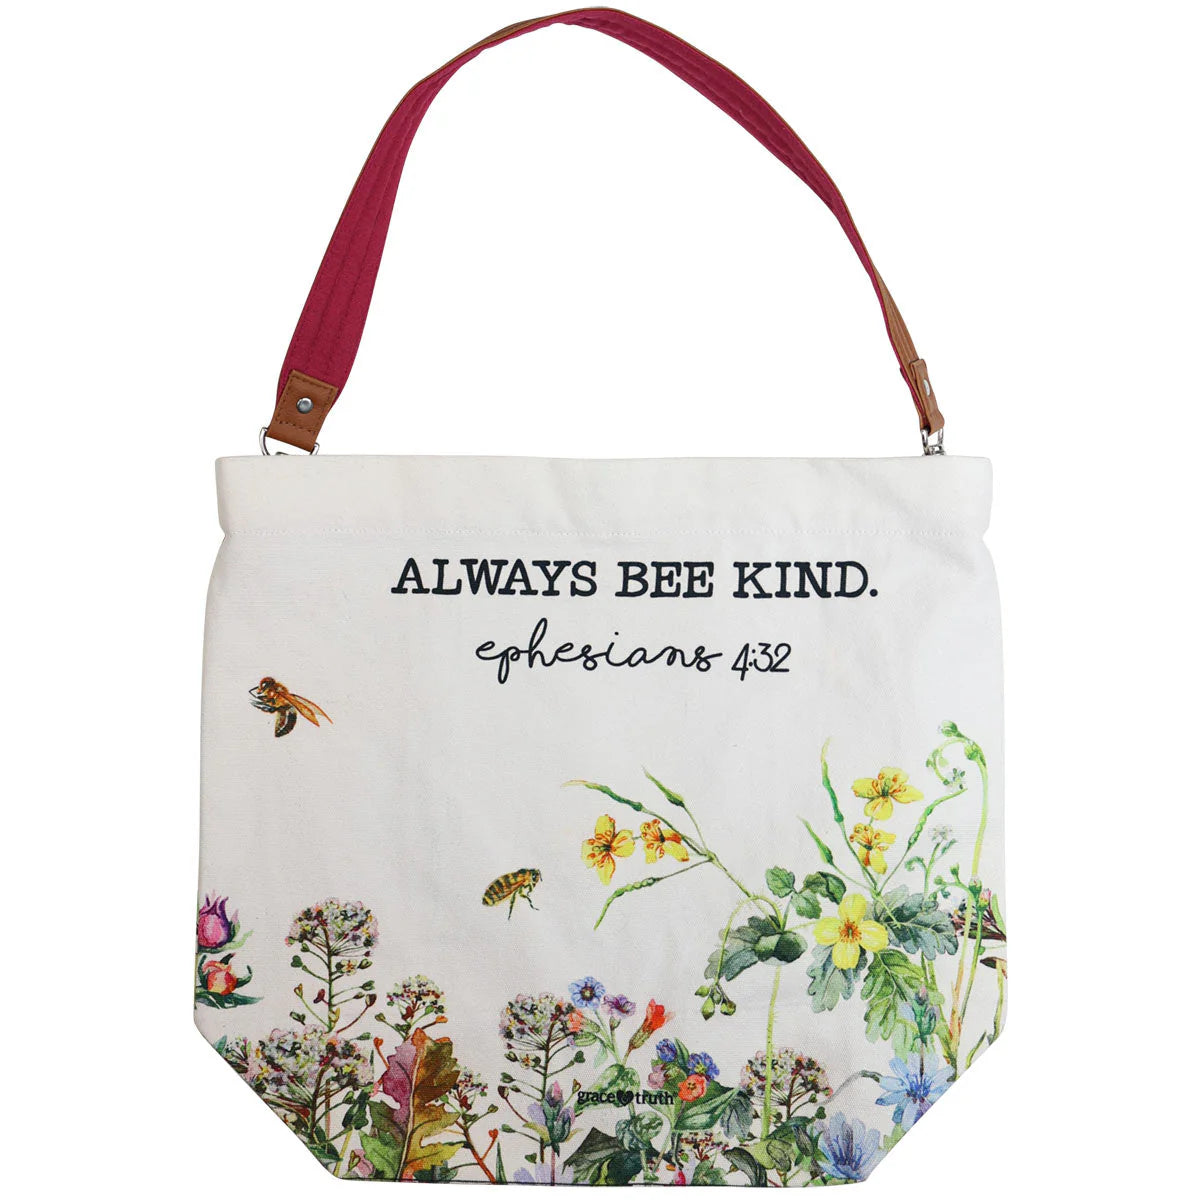 grace & truth Womens Tote Bag Bee Kind grace & truth® accessories Bags Women's